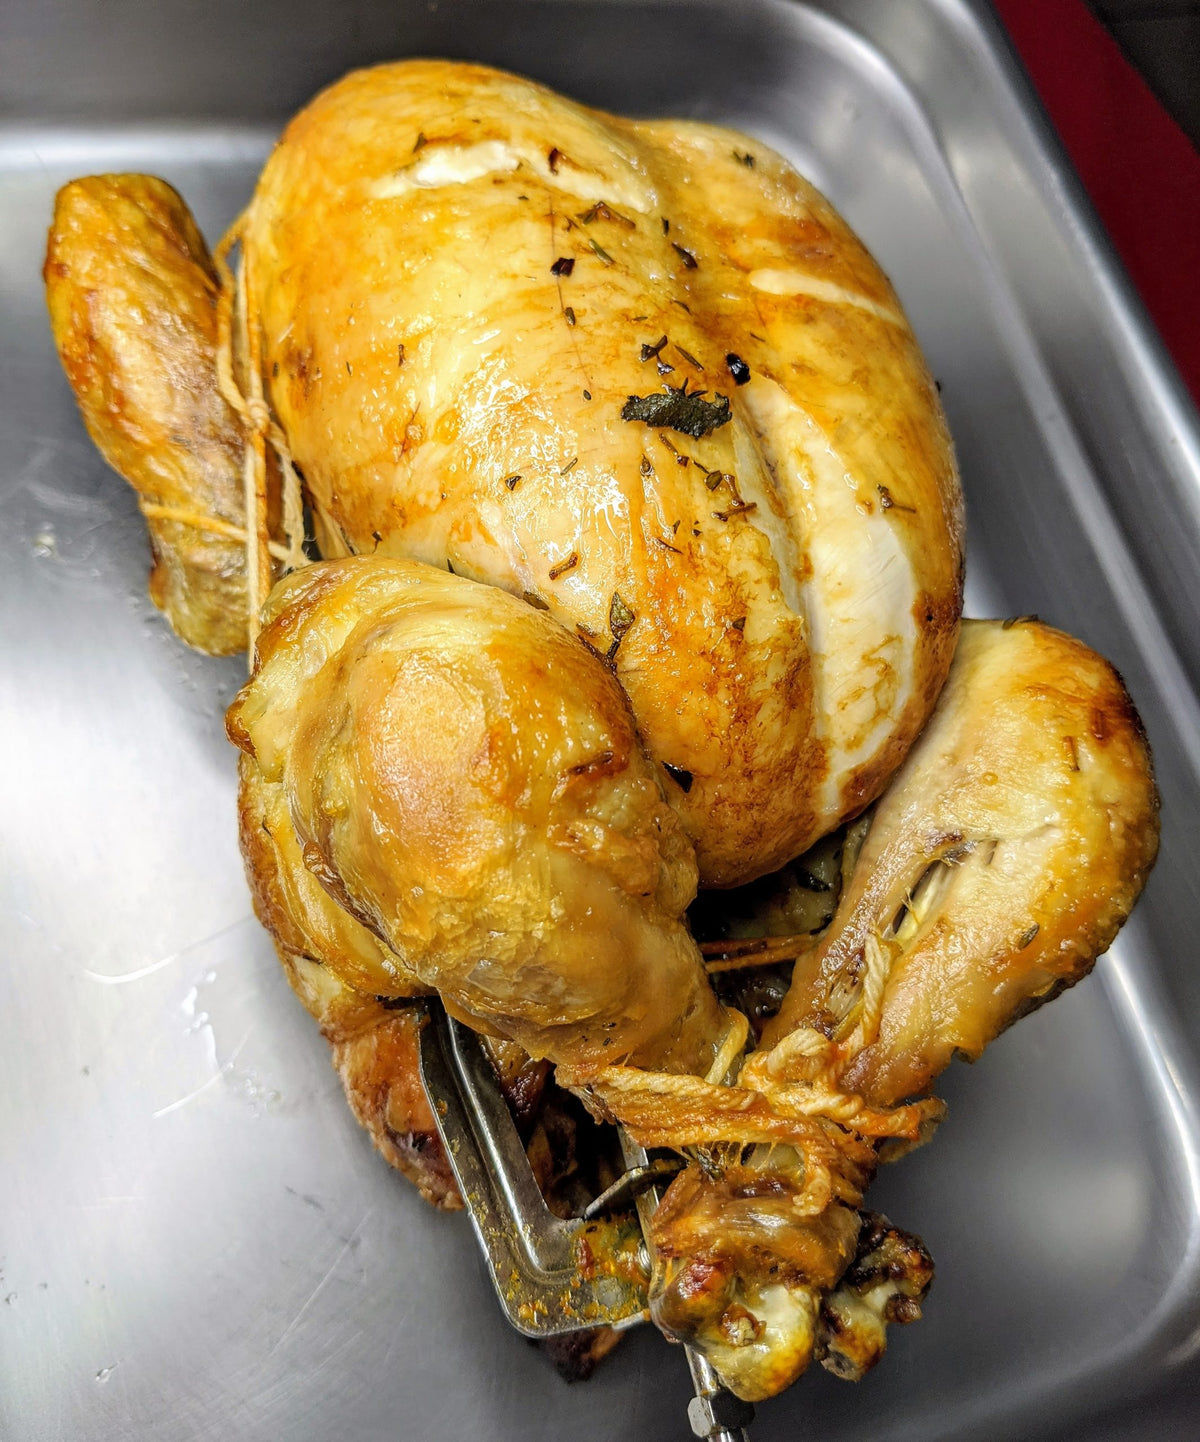 Organic Air-Chilled, All Natural Whole Chicken